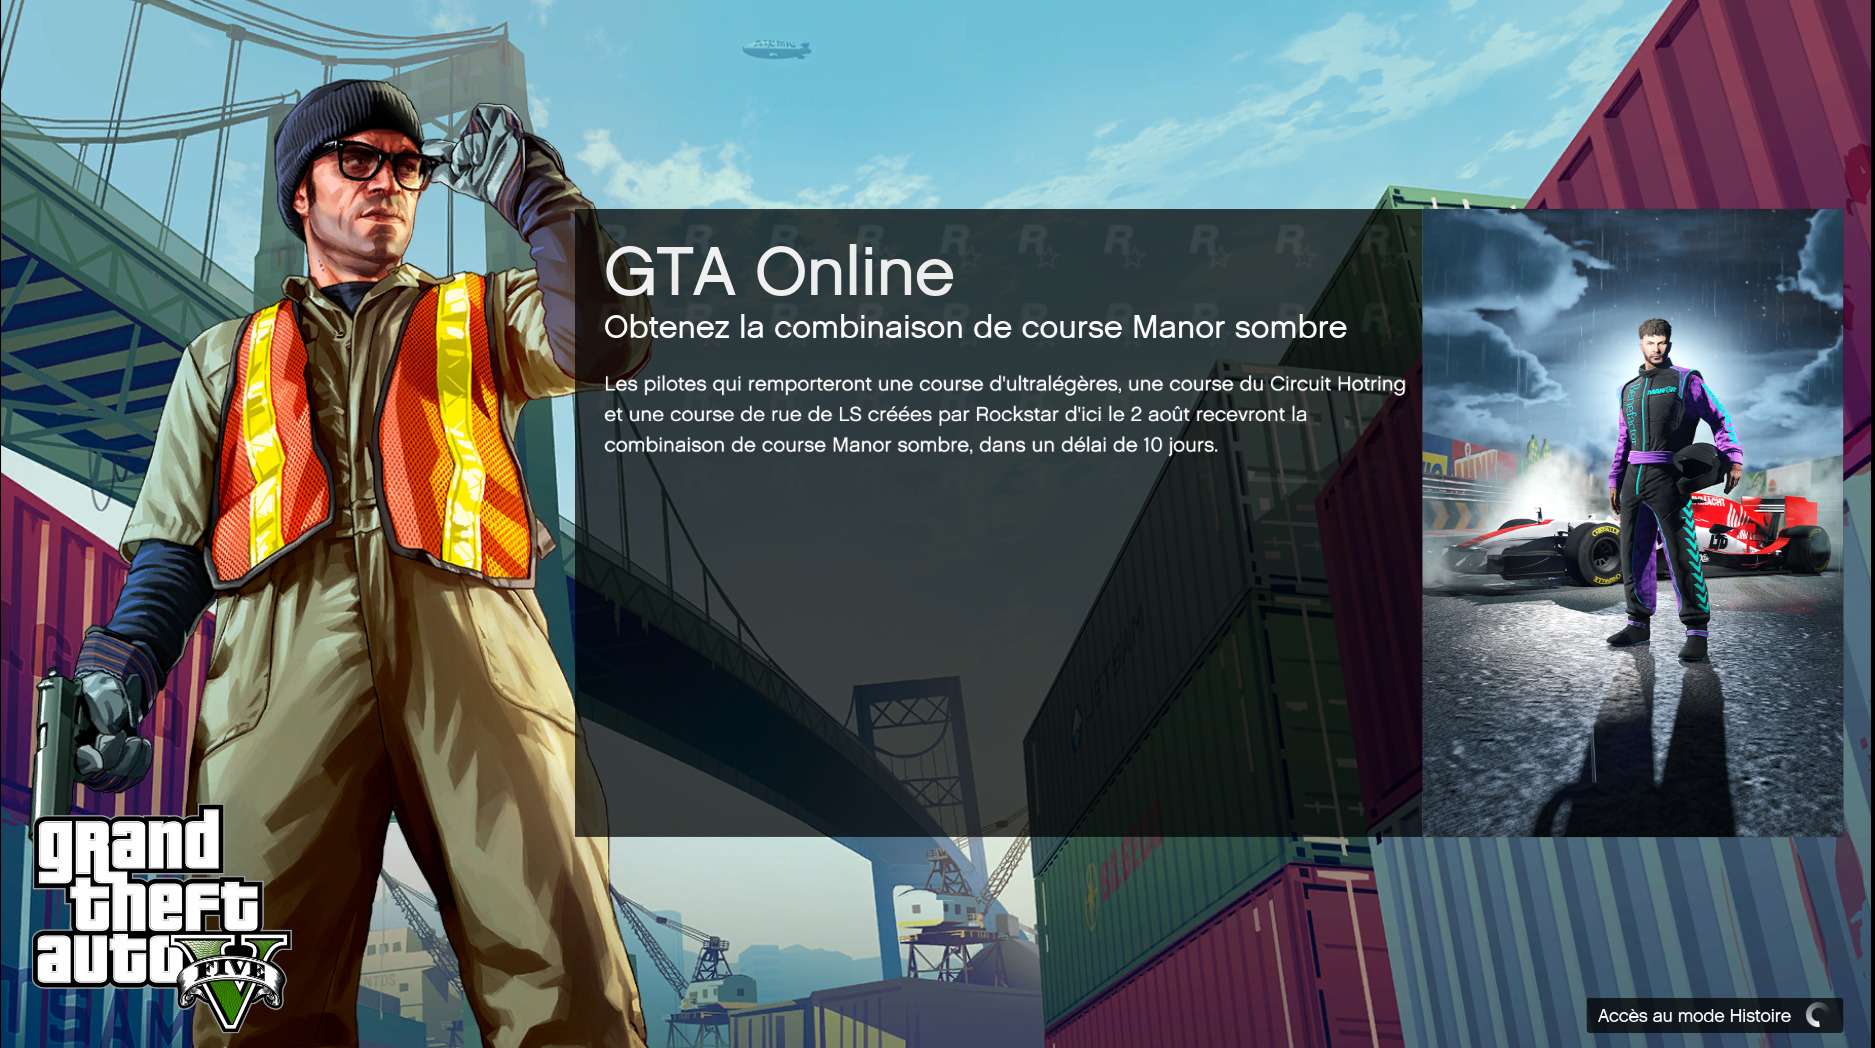 GTA 5: How To Change Language on Epic Games